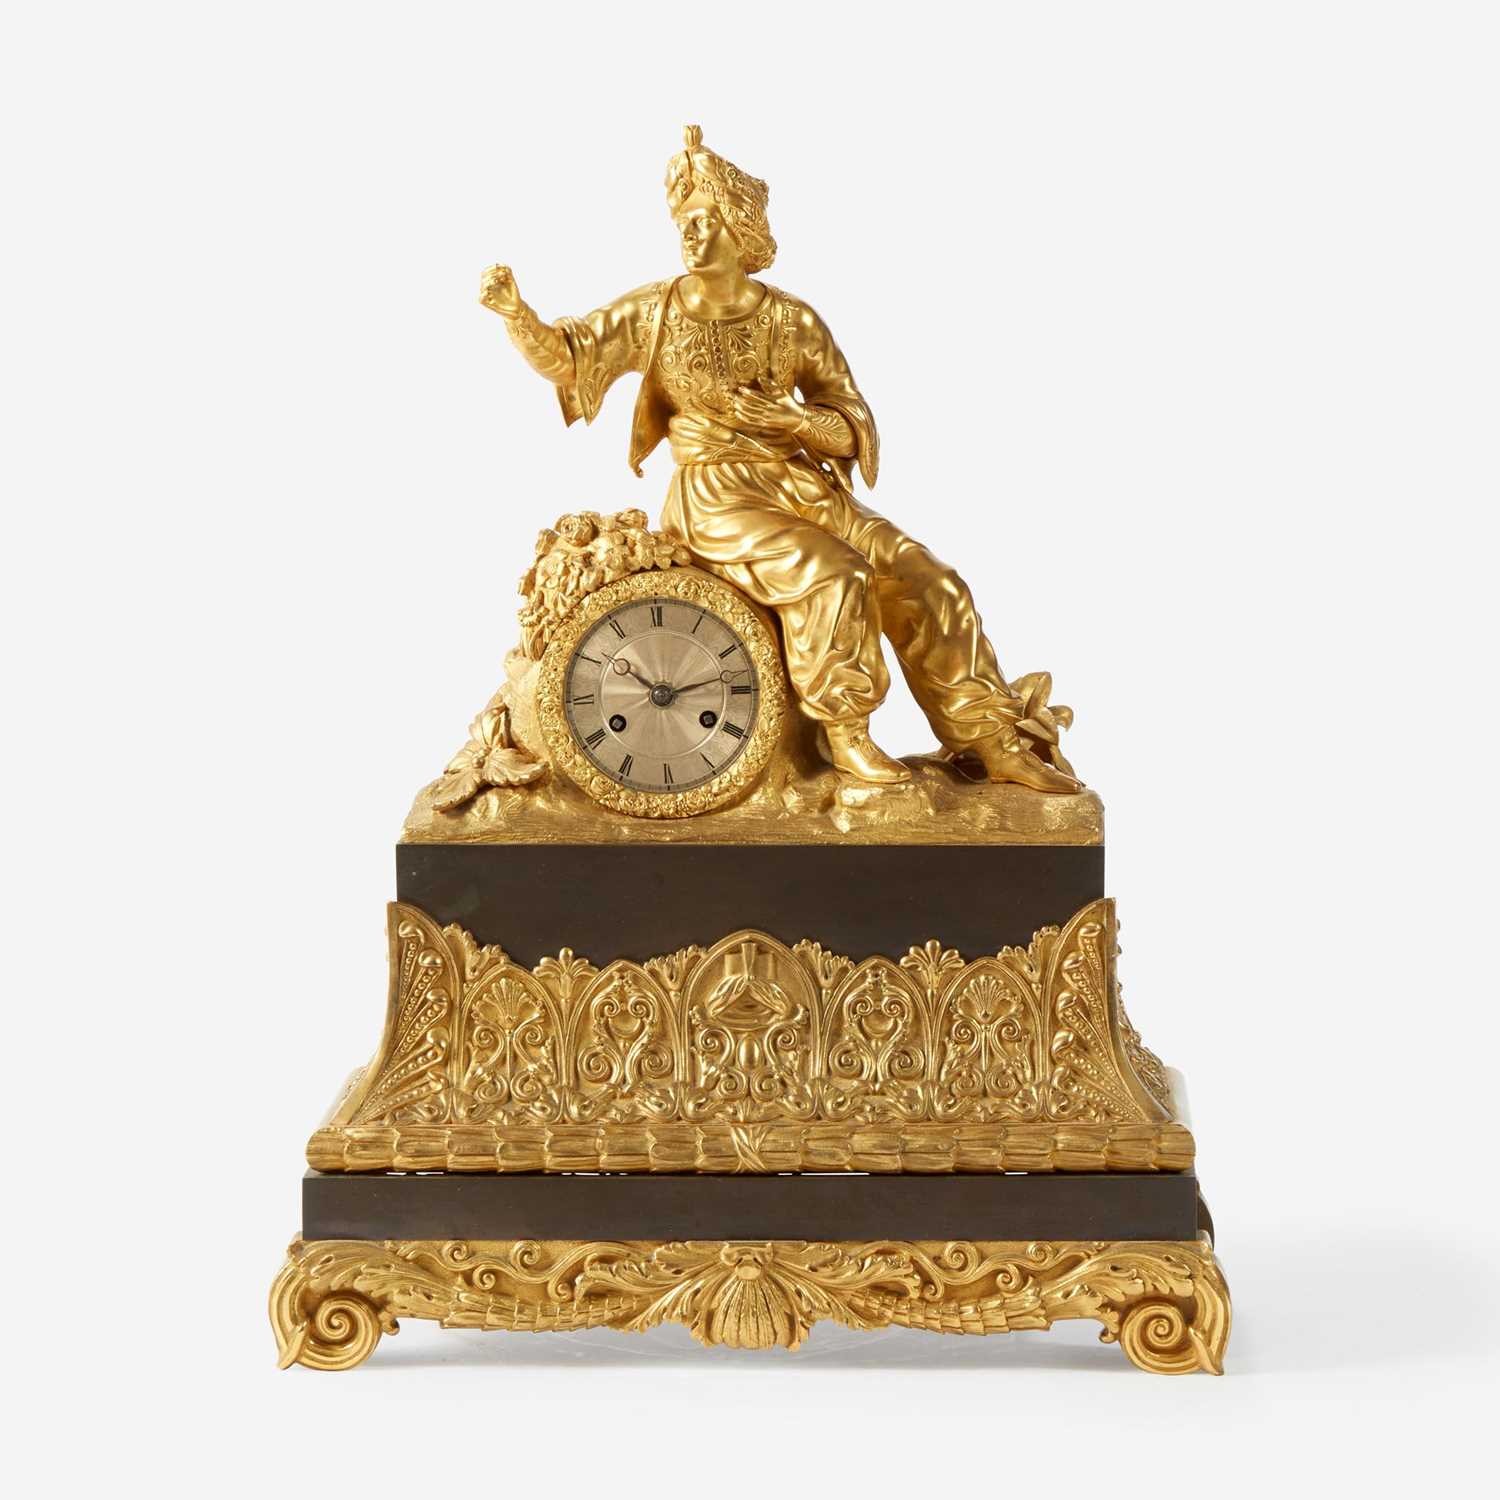 Lot 51 - A Large Continental Patinated and Gilt Bronze Figural Mantle Clock